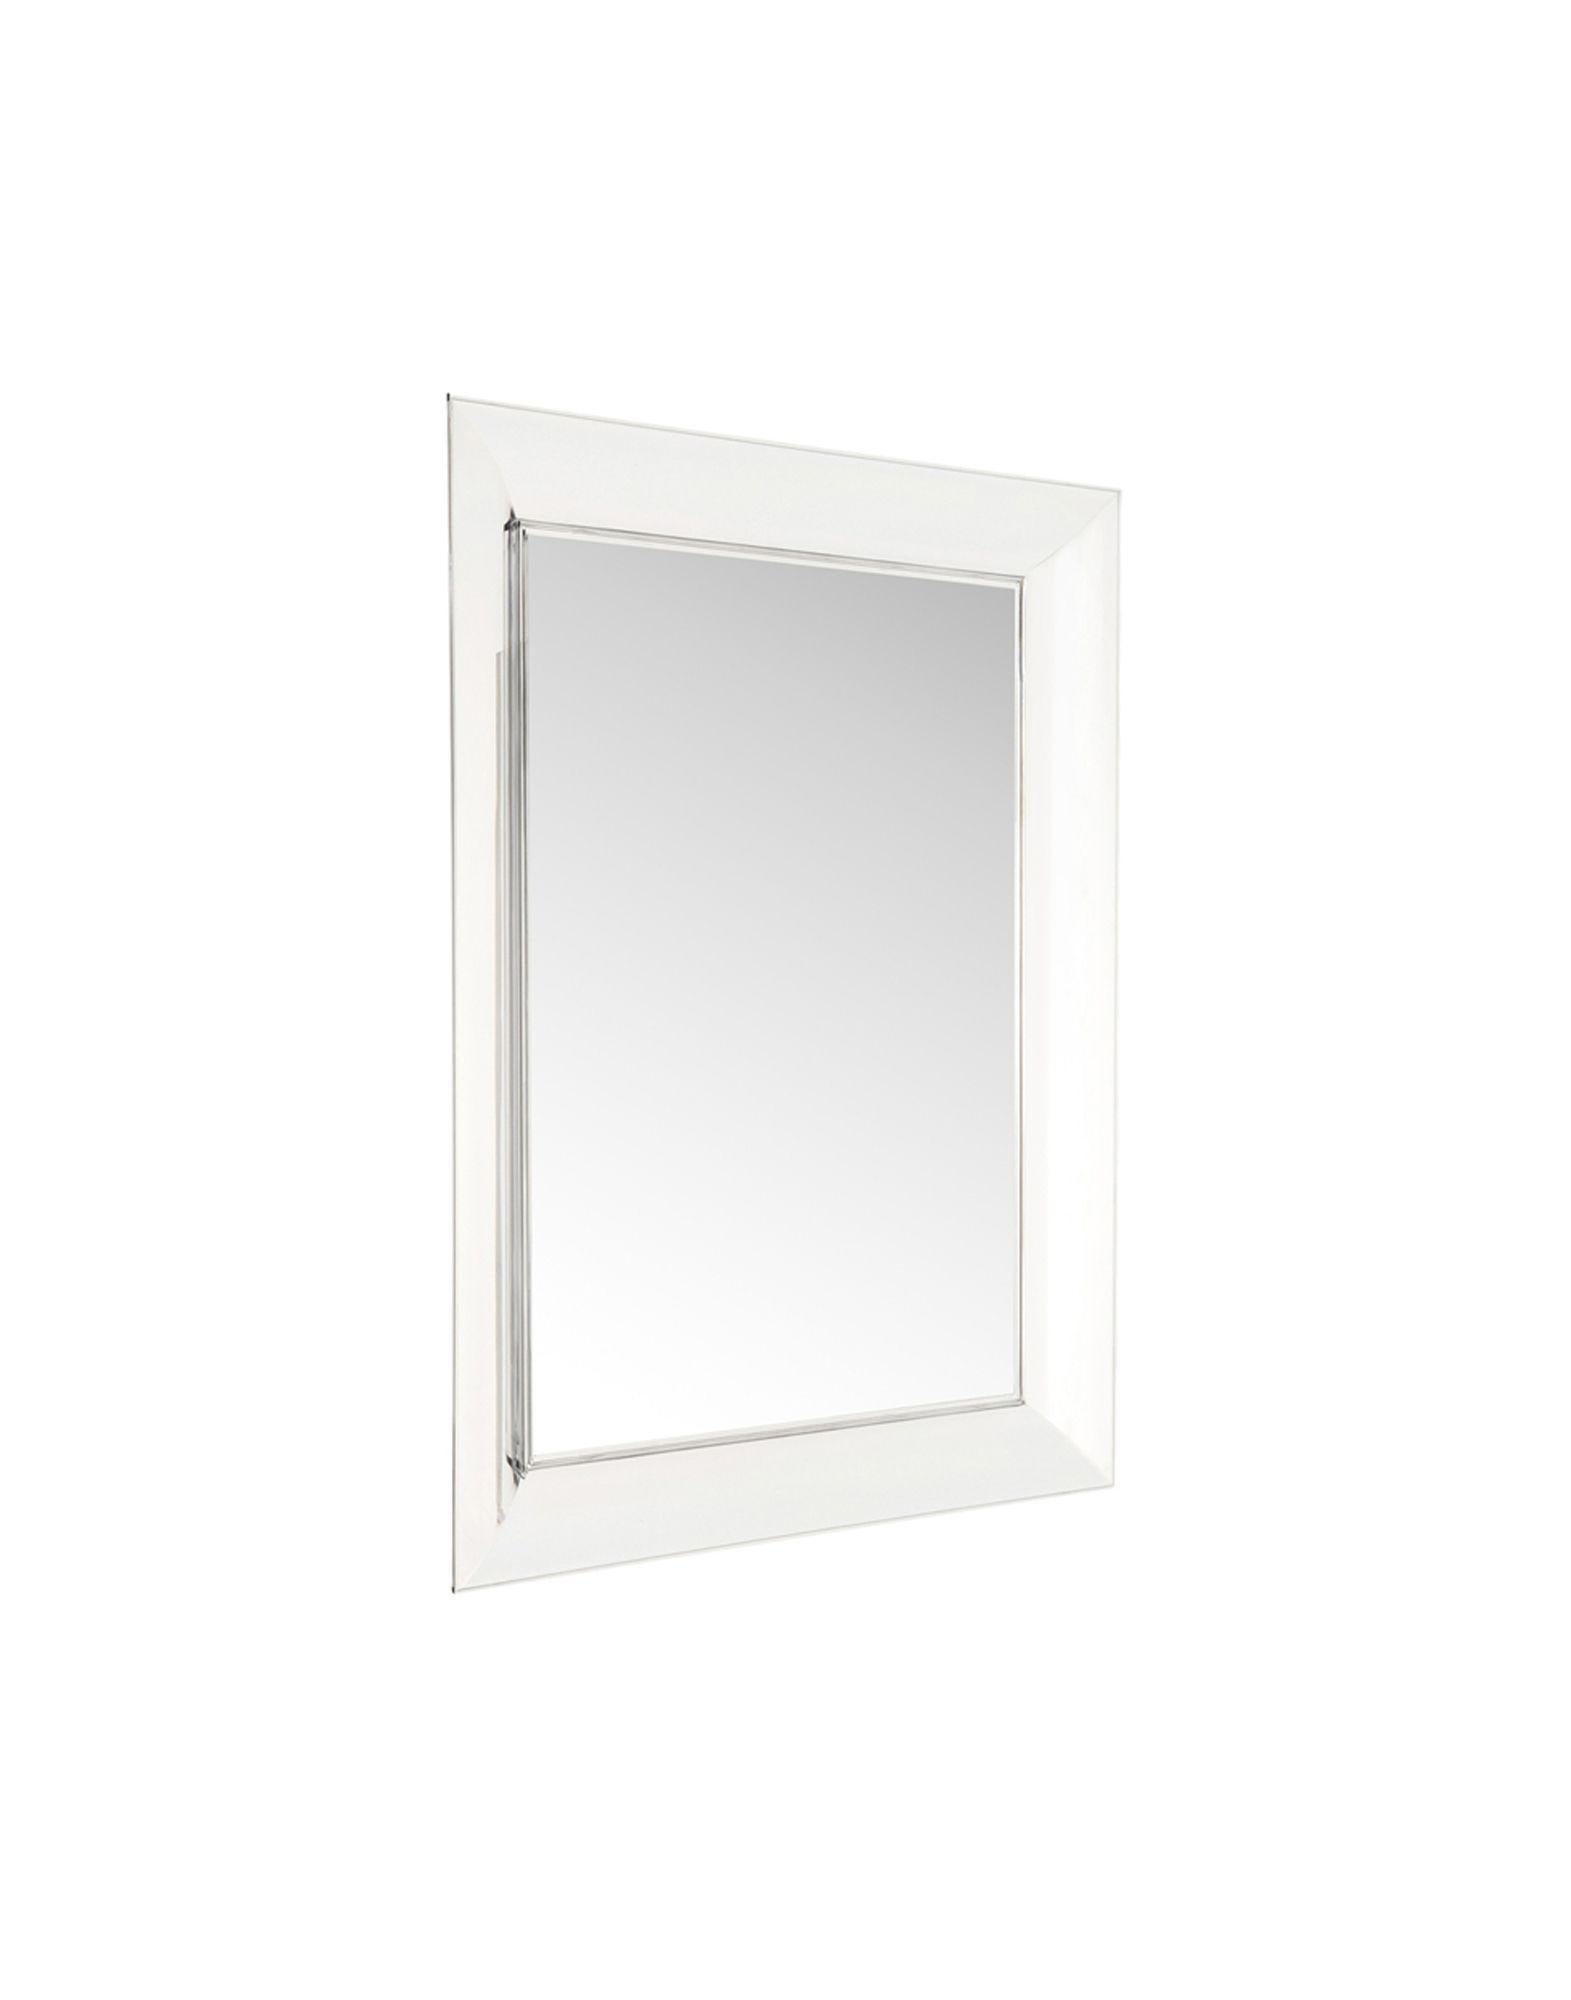 A series of rectangular two-dimensional wall mirrors which bring to mind milled crystal frames. The frames are made of transparent or colored polycarbonate with seagull wing sections and can be hung horizontally or vertically. Designed for